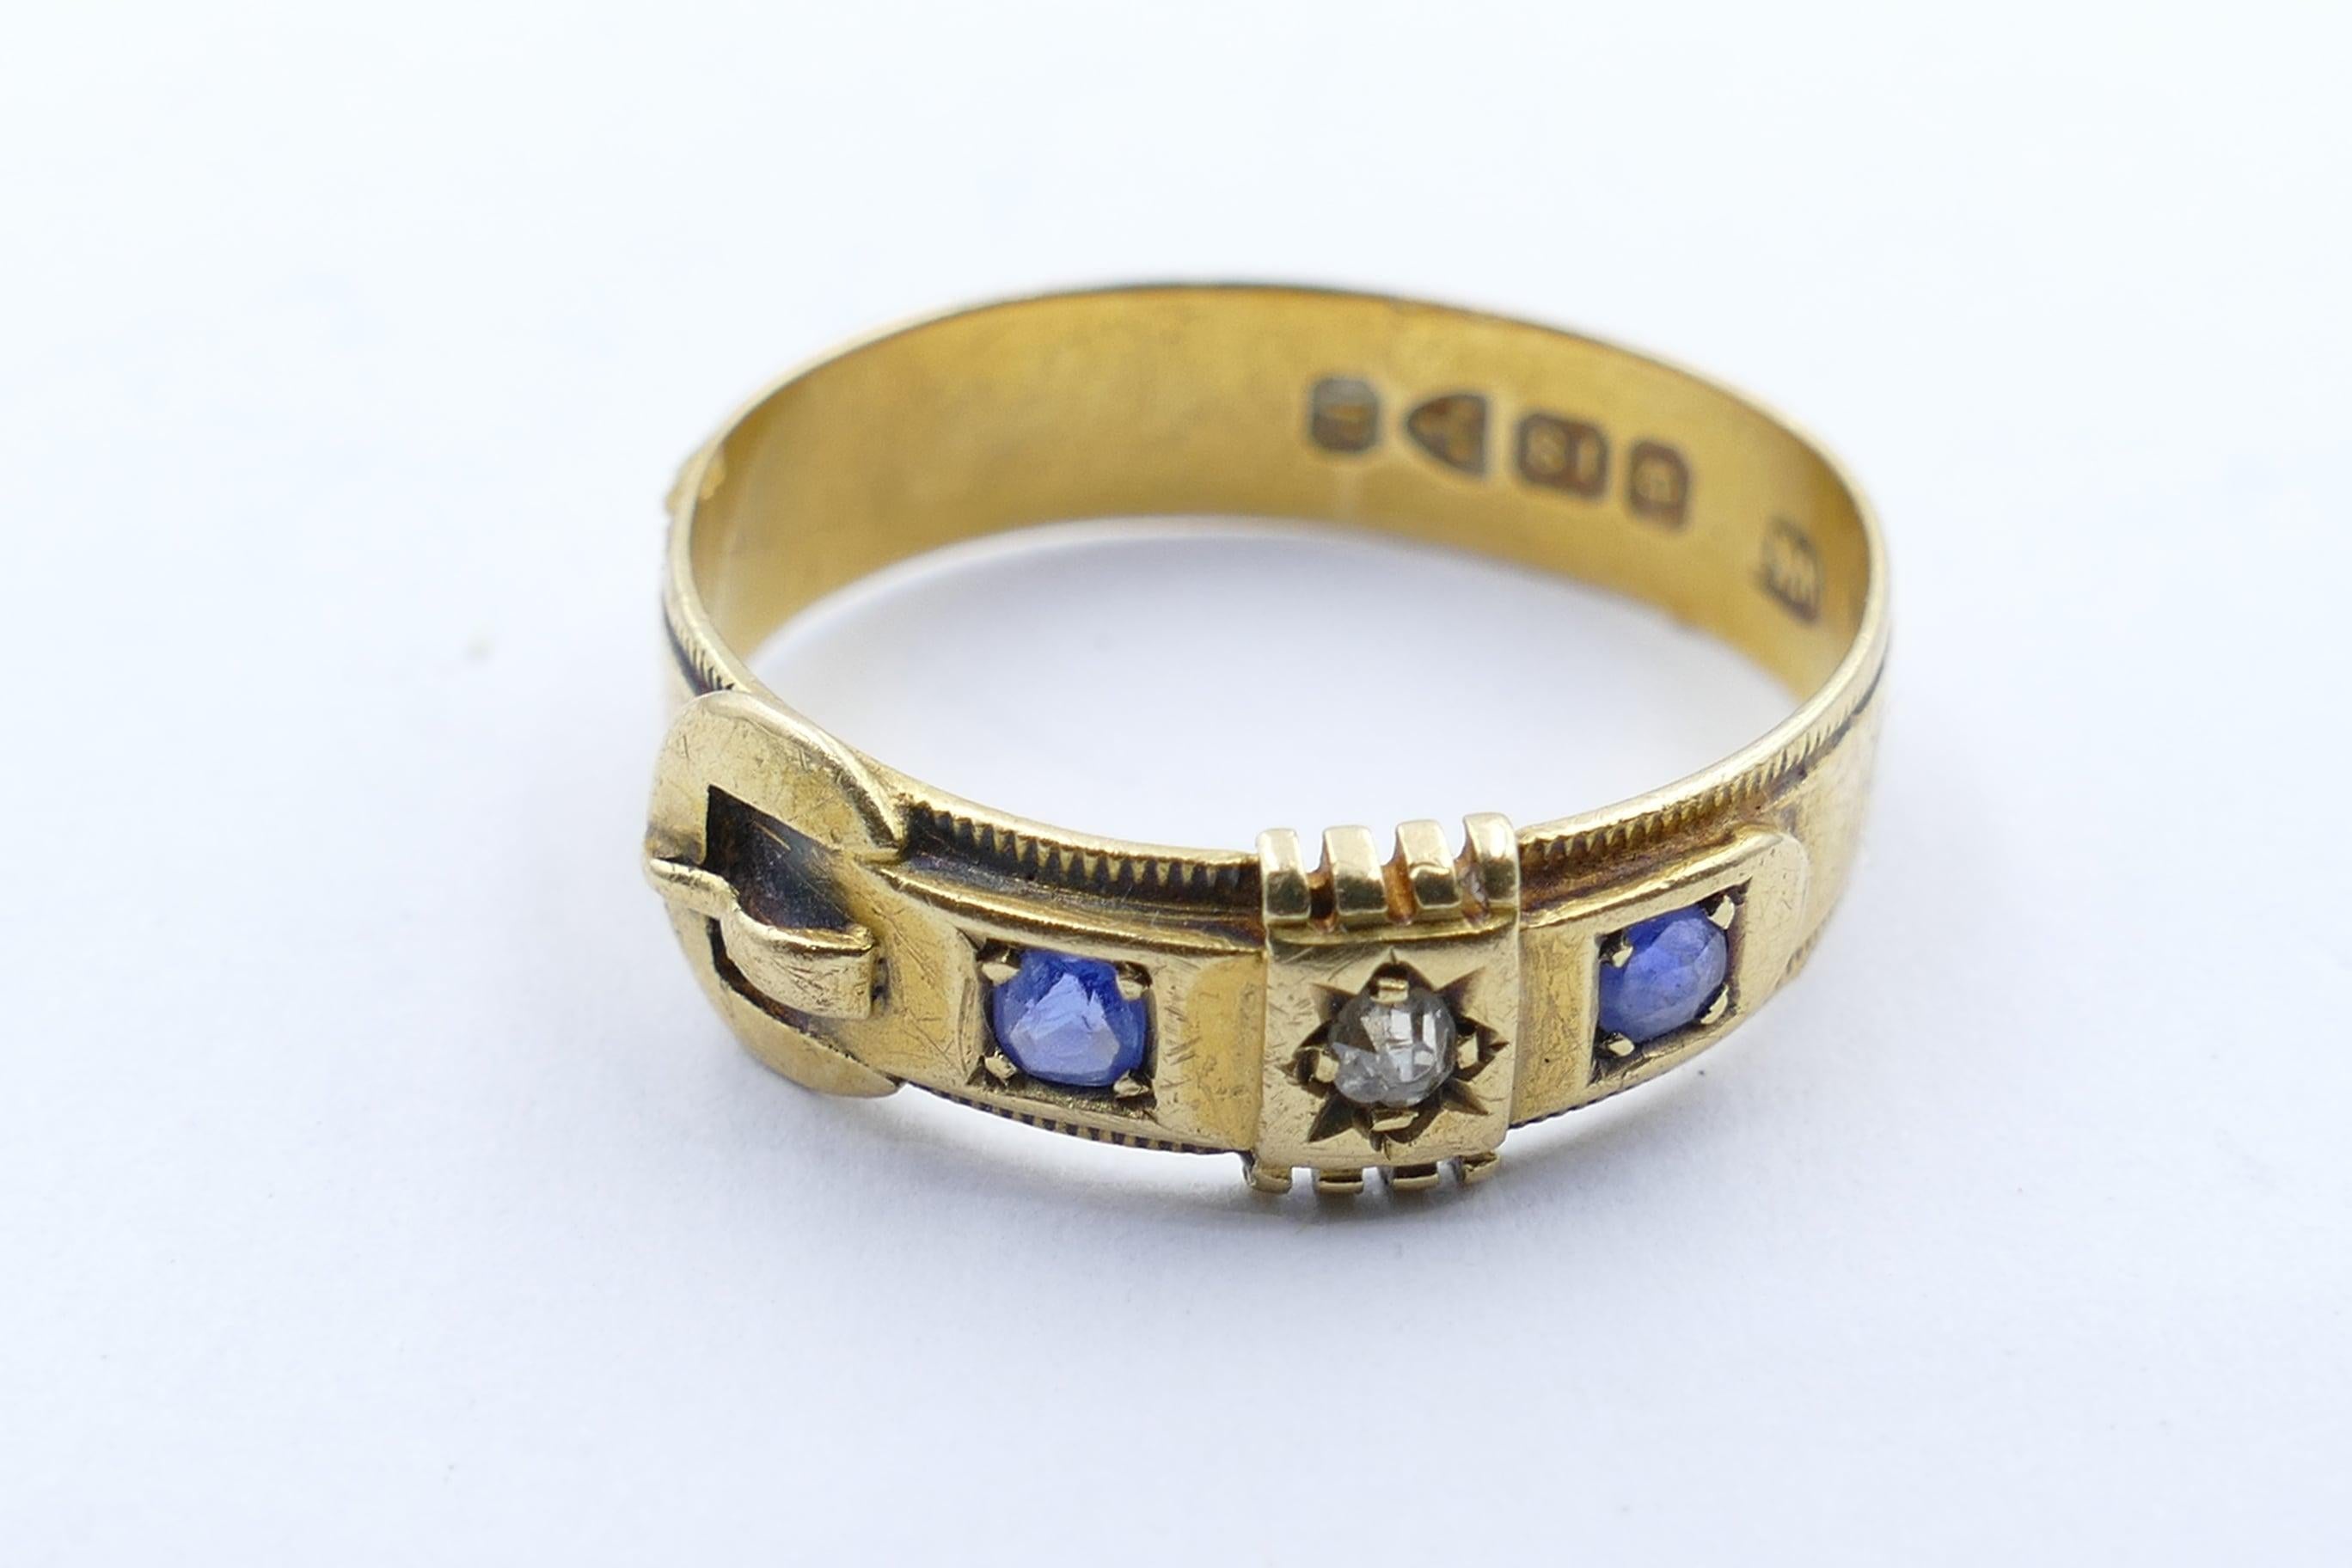 This beautifully preserved Antique (Victorian) Buckle Ring is set with a Diamond as the centrepiece and is flanked by 2 lovely old Ceylon Sapphires, round cut & bead set. The Diamond is old European cut.
The Ring features hallmarks pertaining to